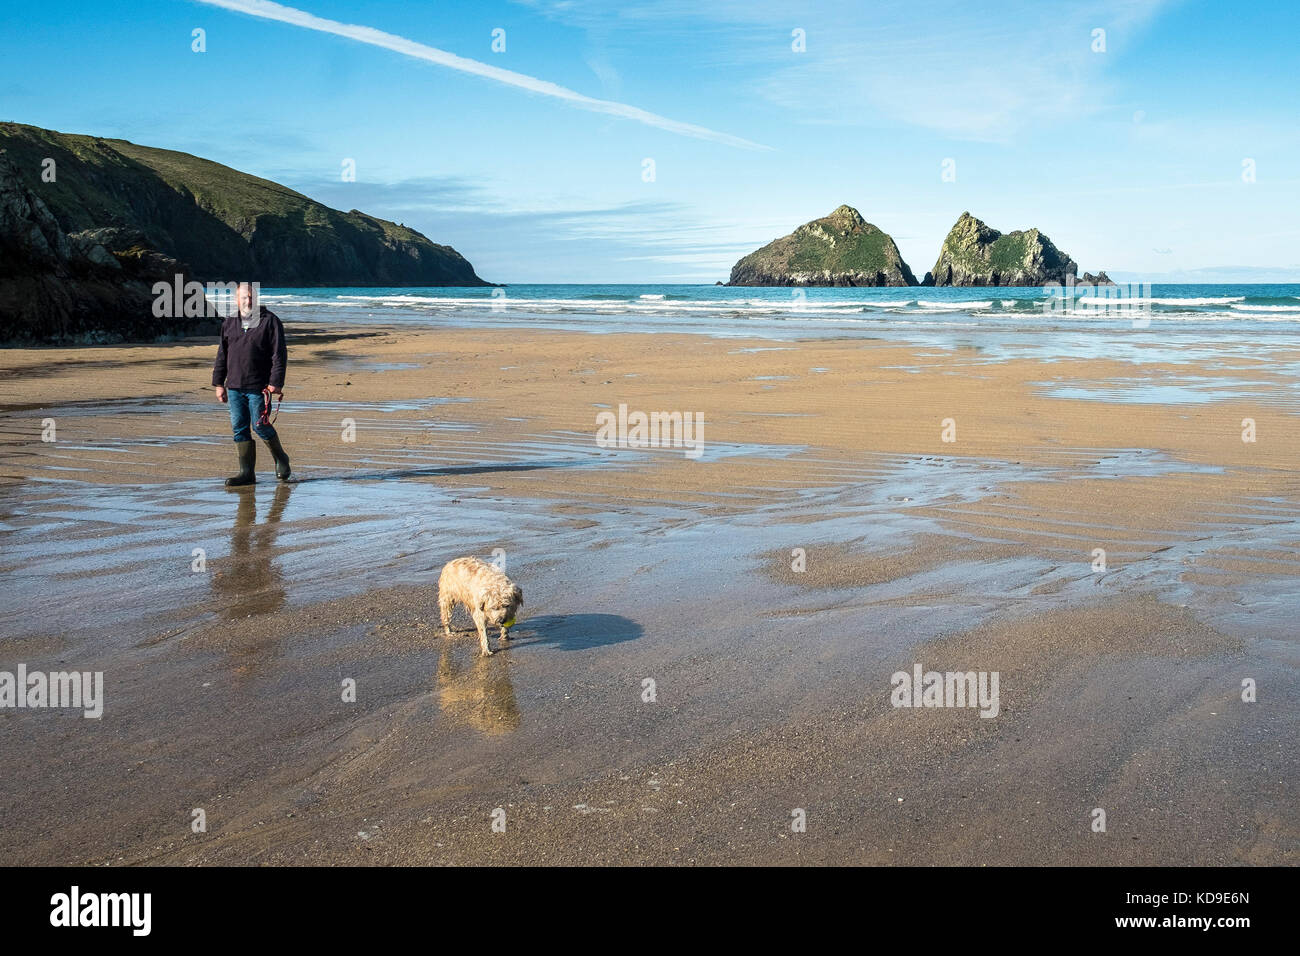 A dog walker on the beach at Holywell Bay Cornwall - Holywell Bay one of the iconic Poldark film locations in Cornwall. Stock Photo